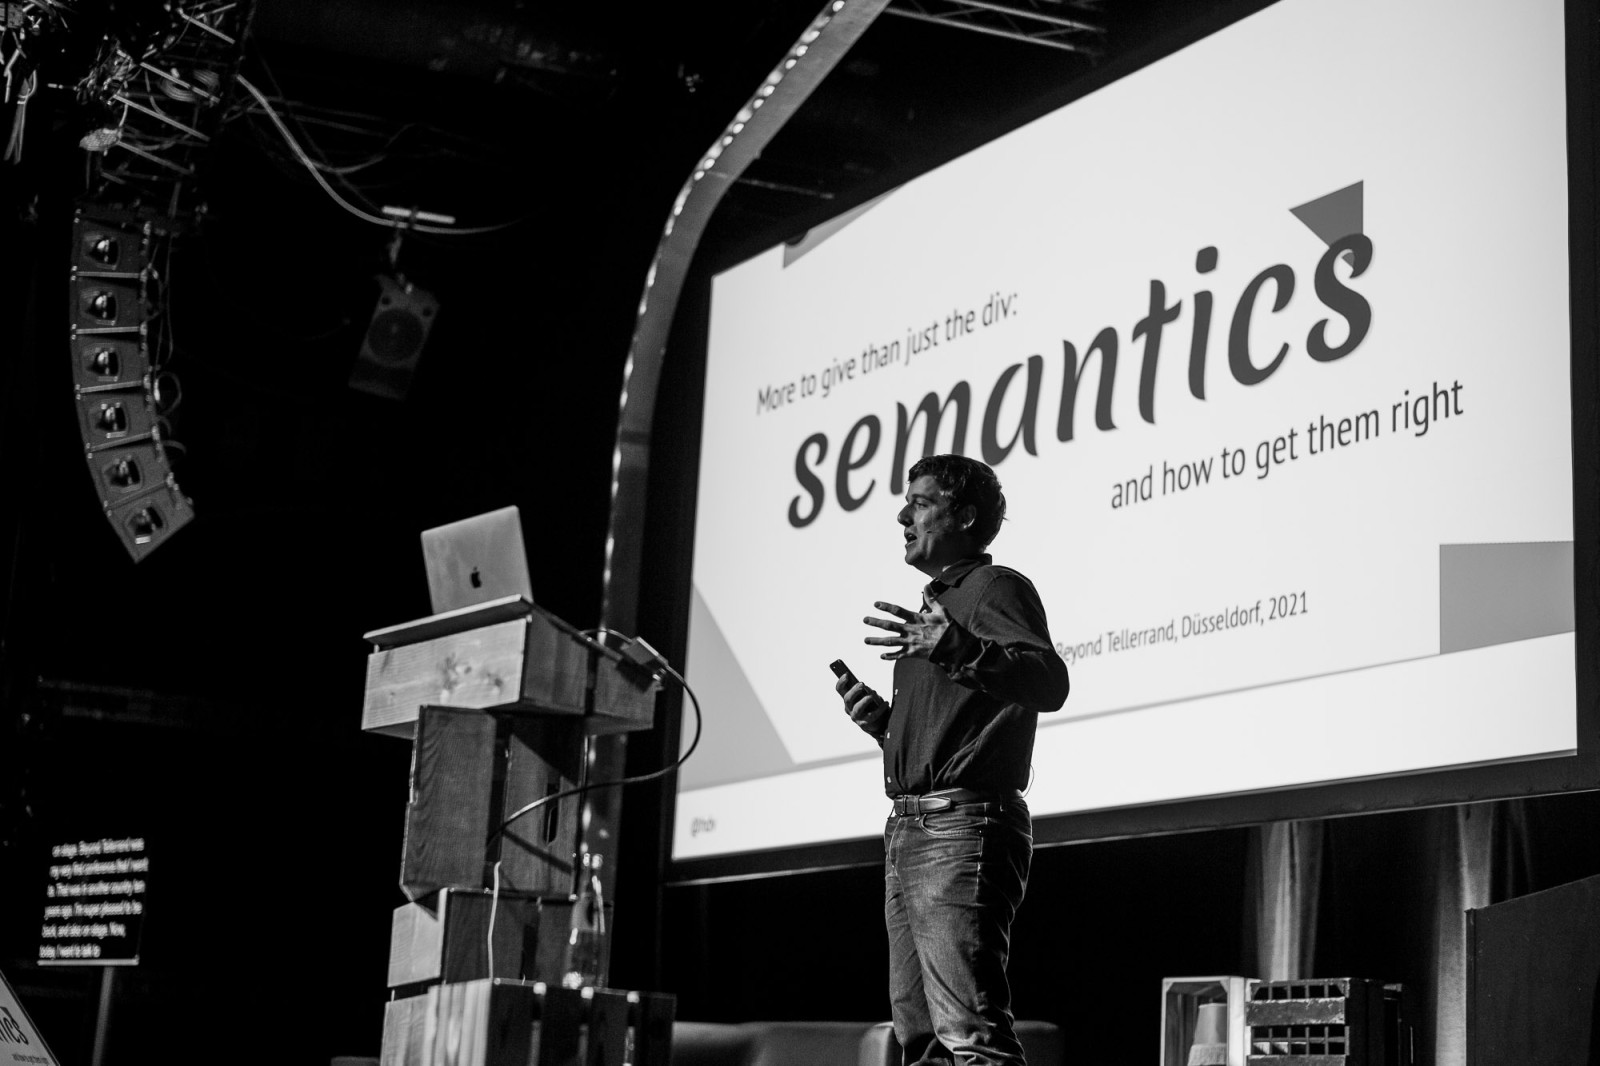 Hidde in front of slide that says semantics and how to get them right